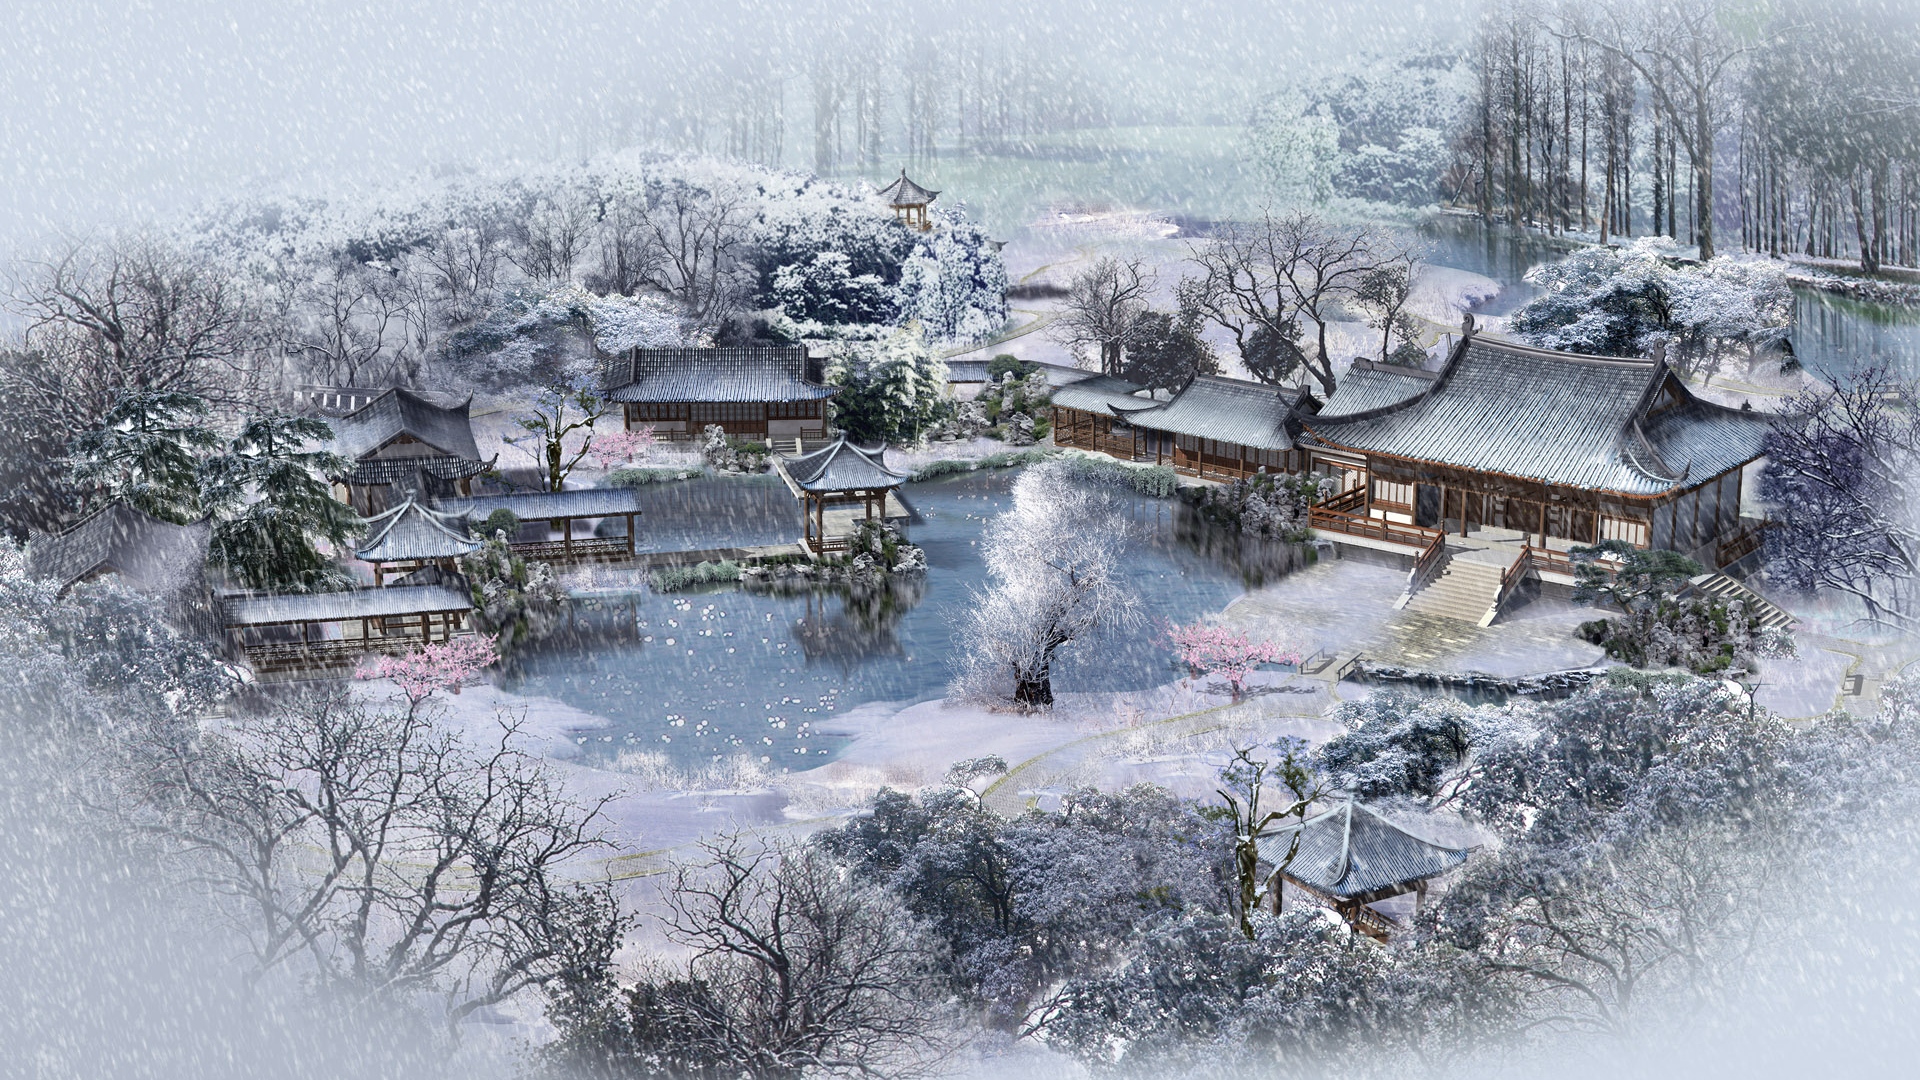 Download wallpaper 1920x1080 winter, lodges, china, snow